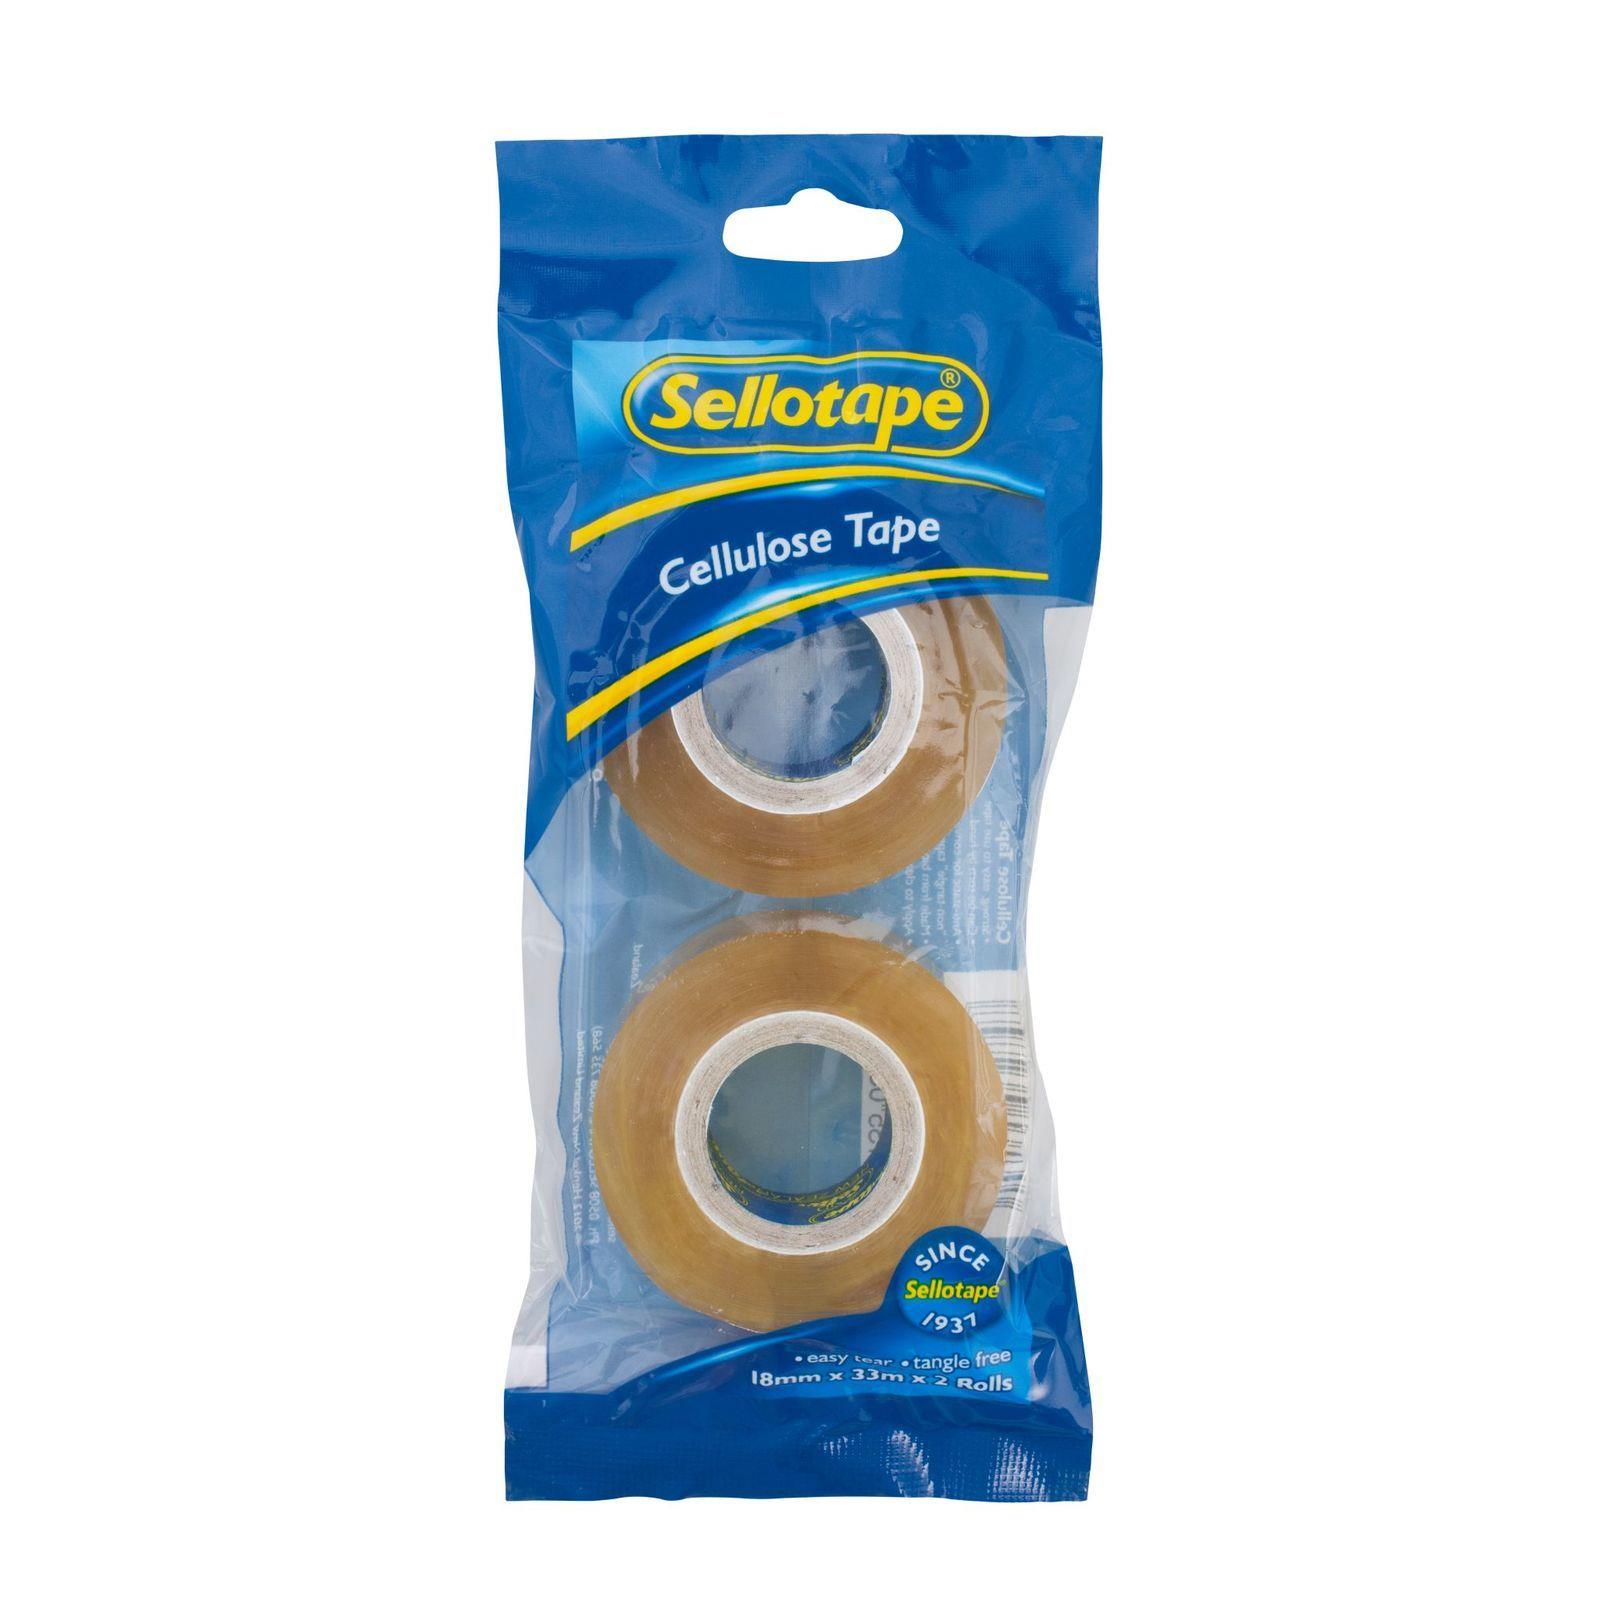 Sellotape: Cellulose Tape 2 Pack (18mmx33m)